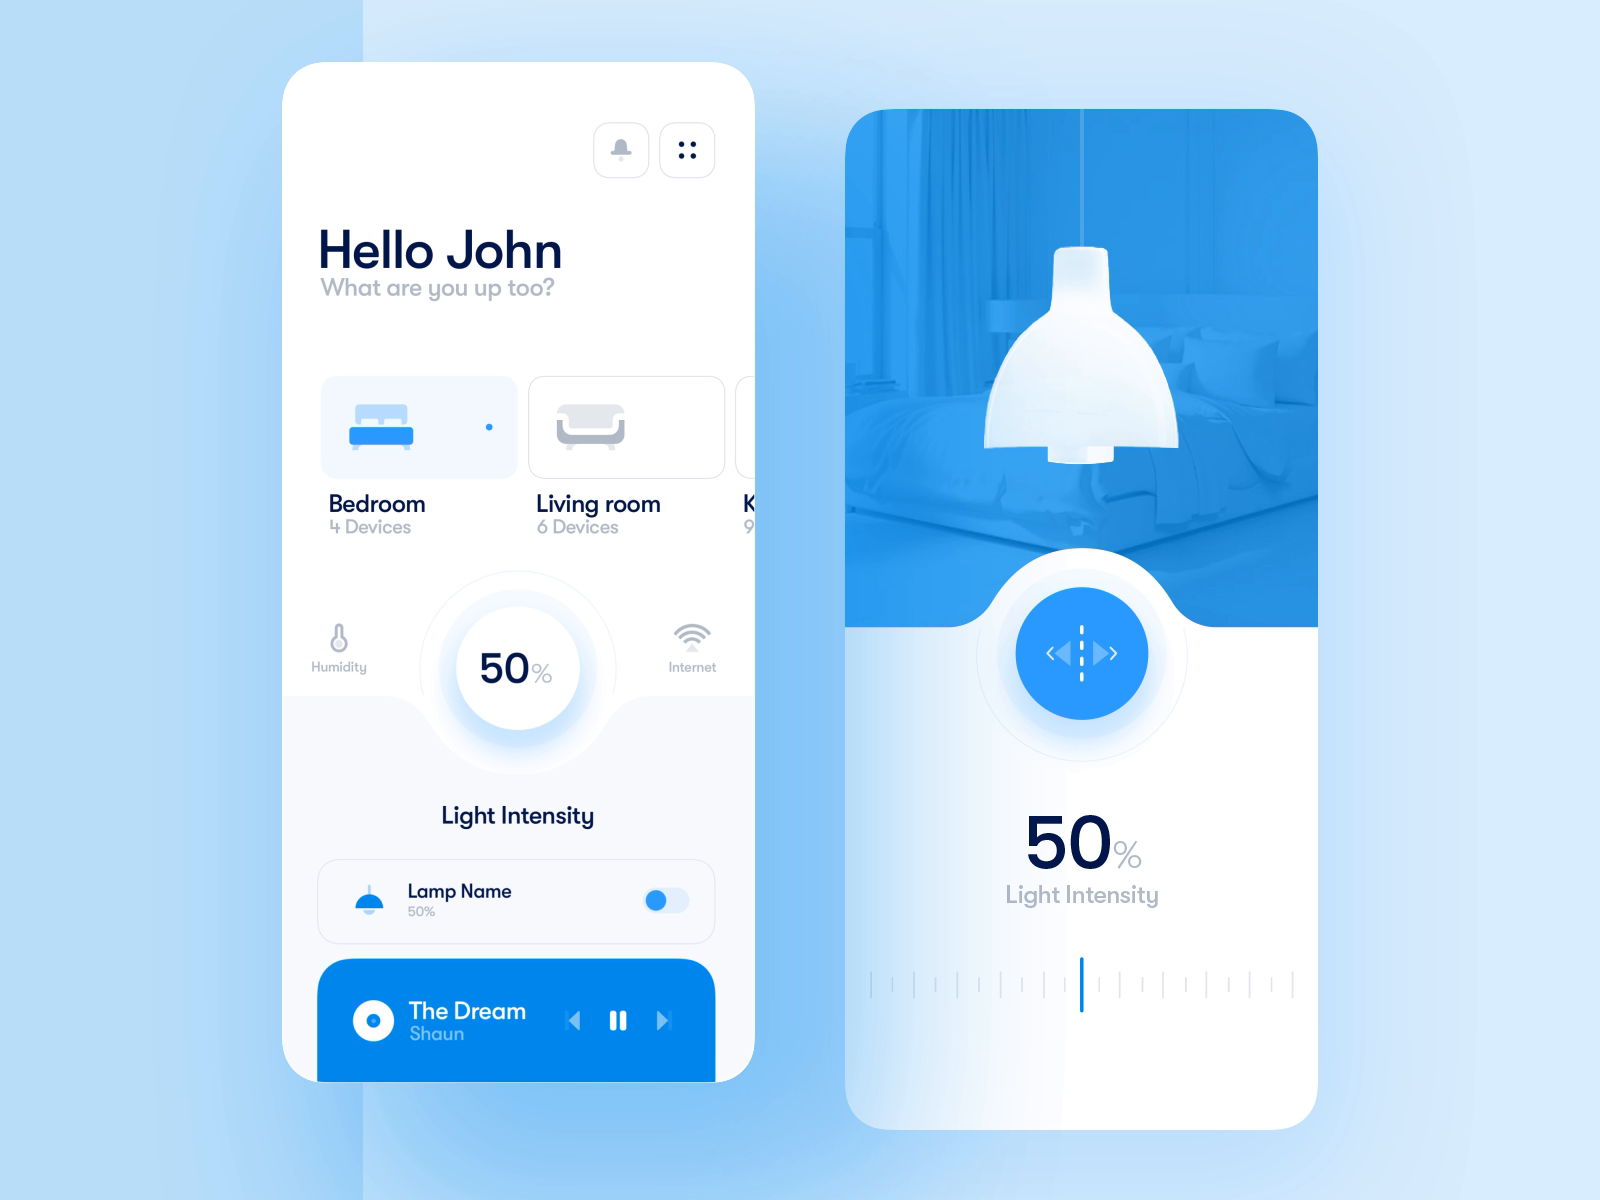 Web app - Smart House by Outcrowd on Dribbble